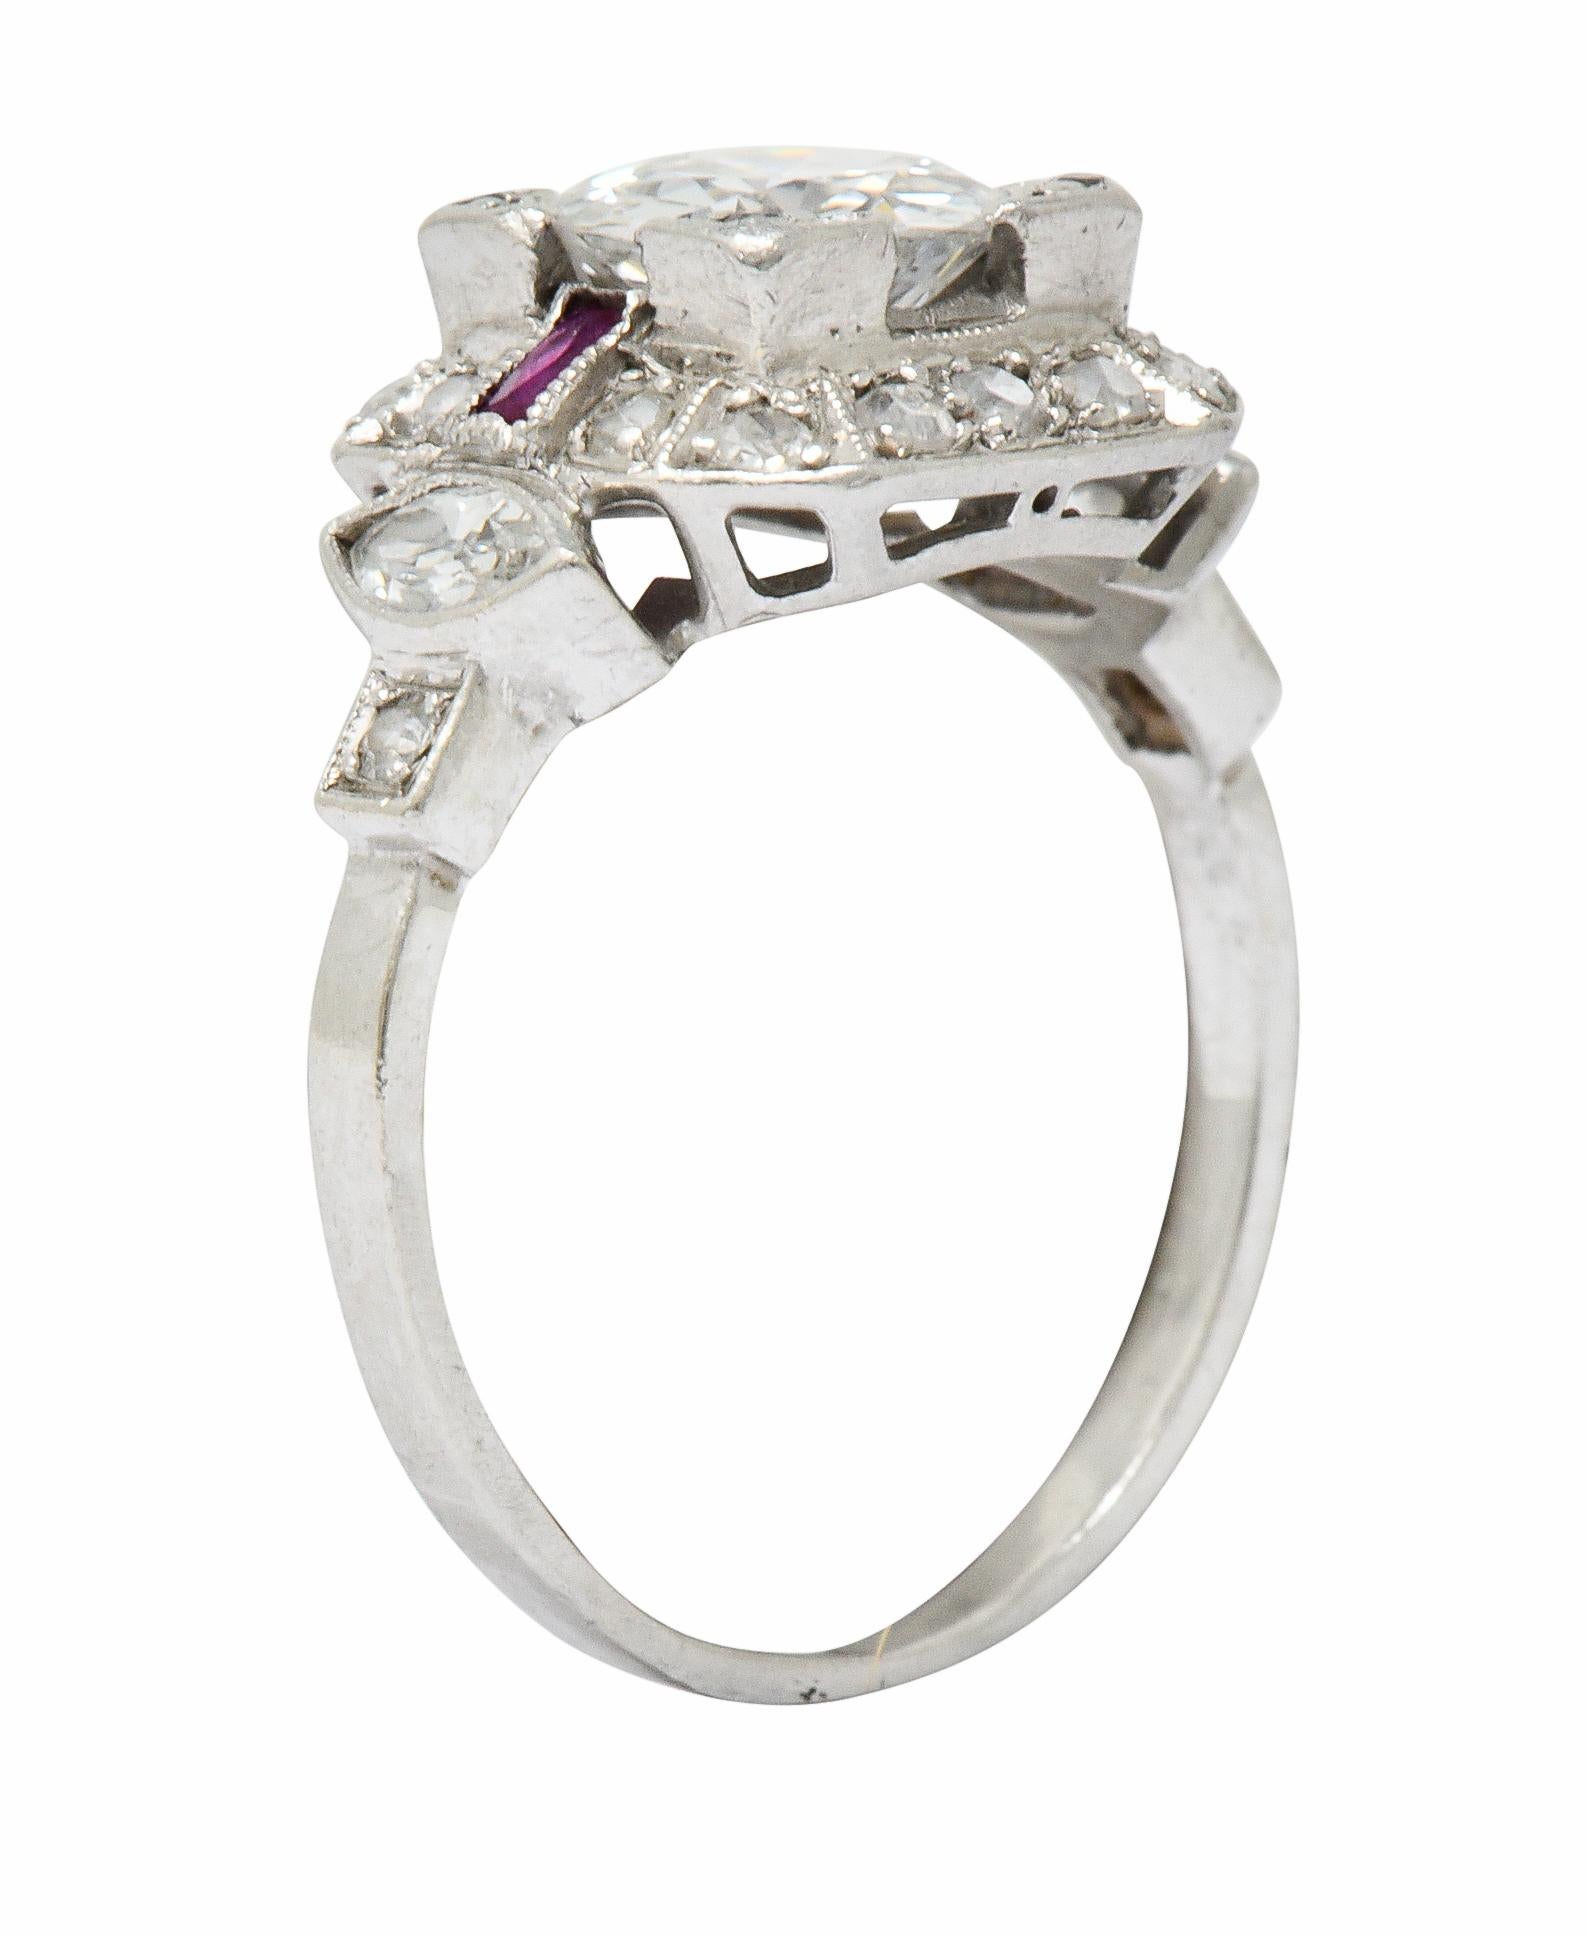 Centering a transitional cut diamond weighing approximately 1.03 carats; H color with SI clarity

Set low in a square form head and flanked by two brightly colored and bezel set scissor cut rubies

With a single cut diamond halo and marquise cut